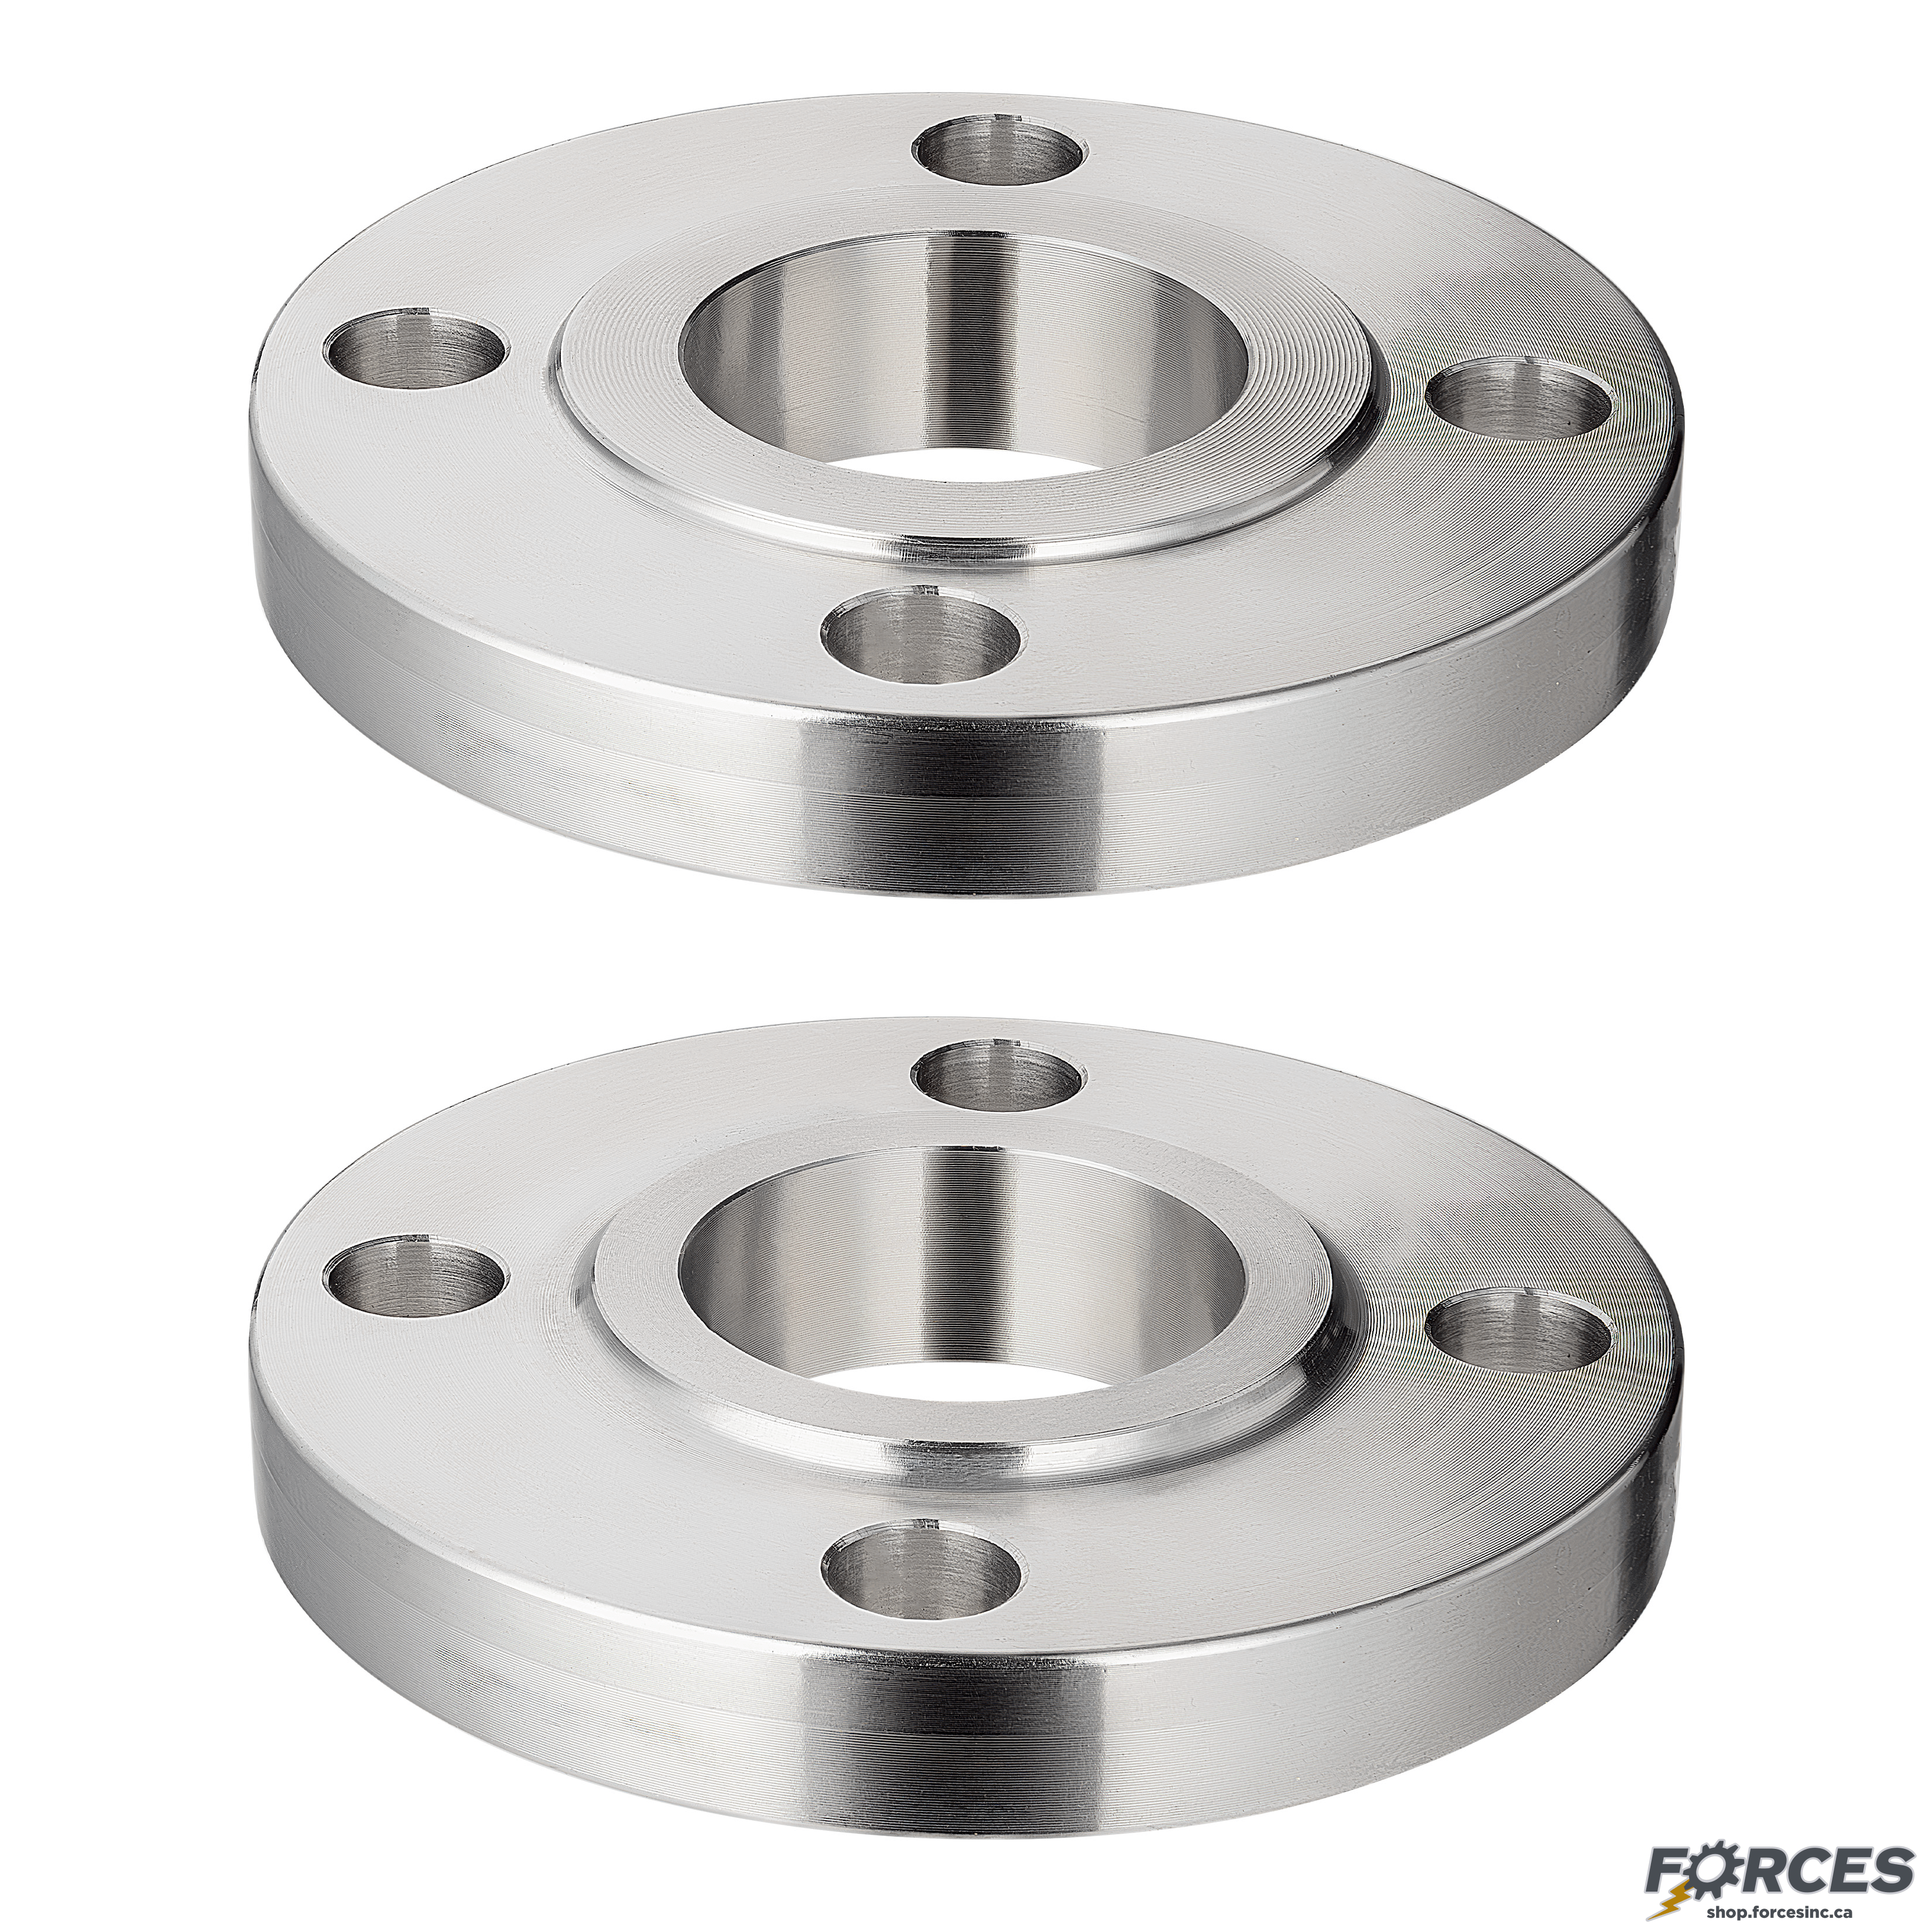 1-1/2" Slip-On Flange Class #150 - Stainless Steel 304 - Forces Inc